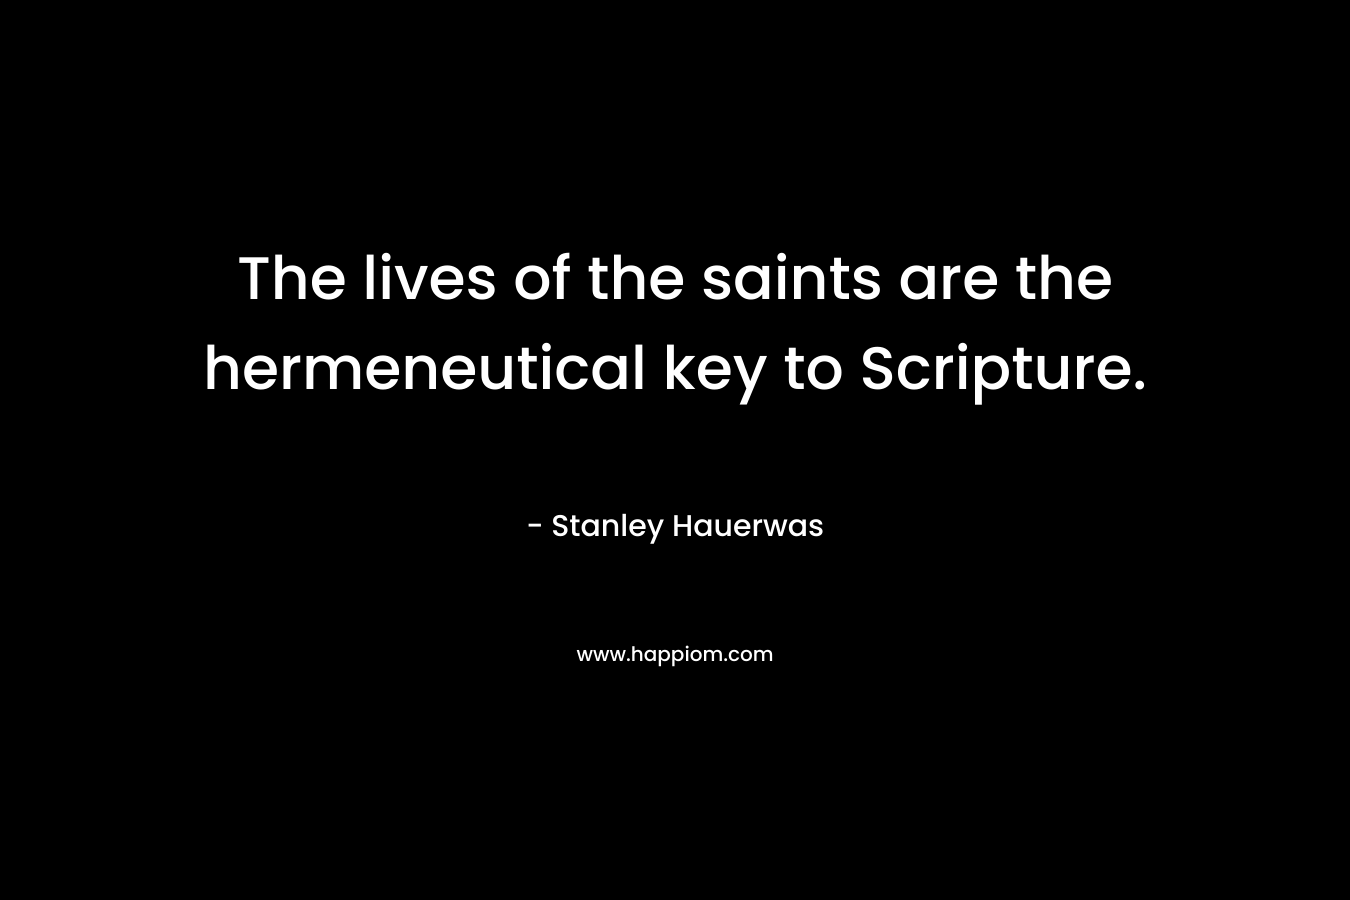 The lives of the saints are the hermeneutical key to Scripture. – Stanley Hauerwas